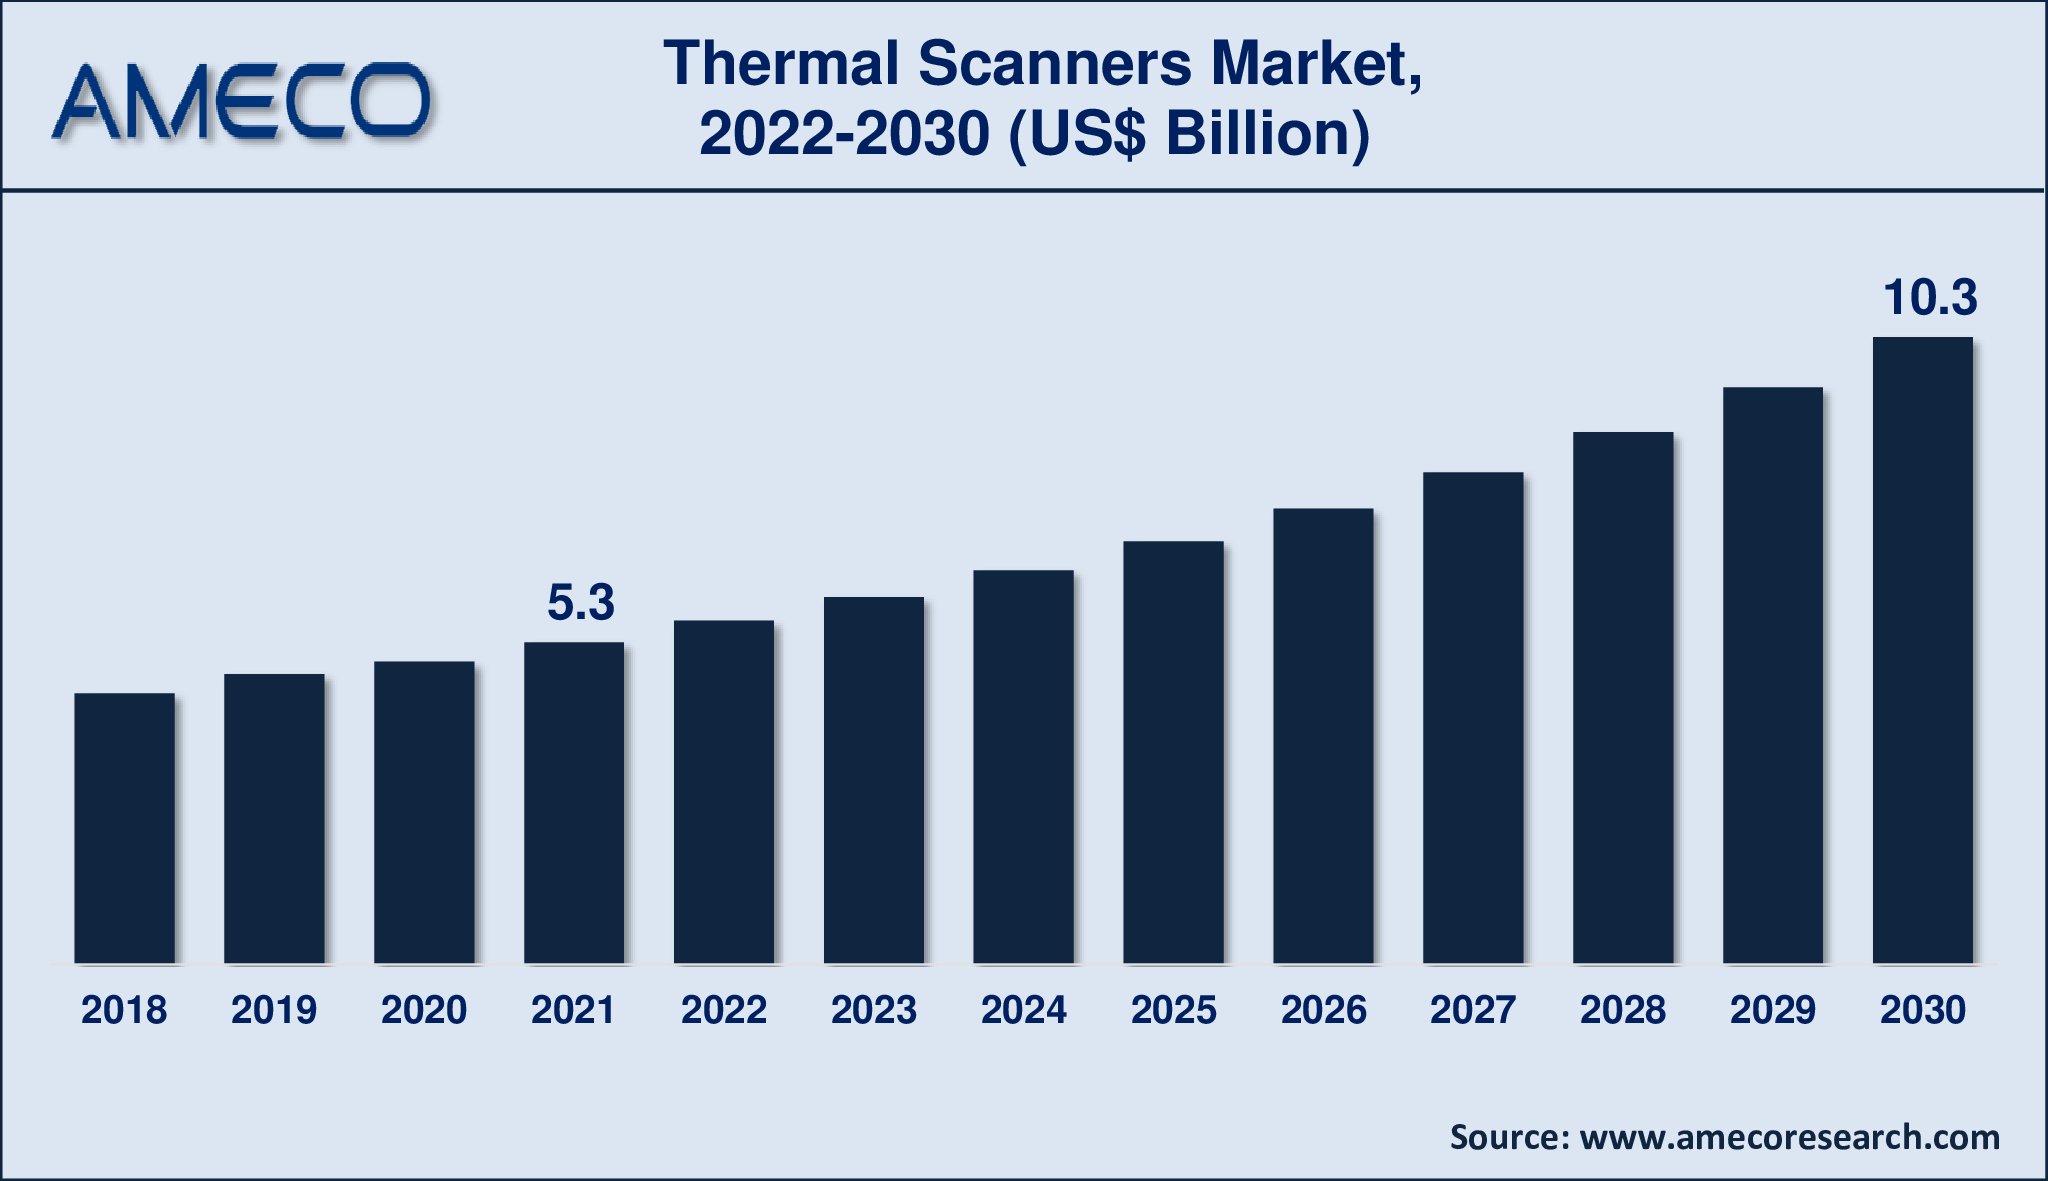 Thermal Scanners Market Dynamics